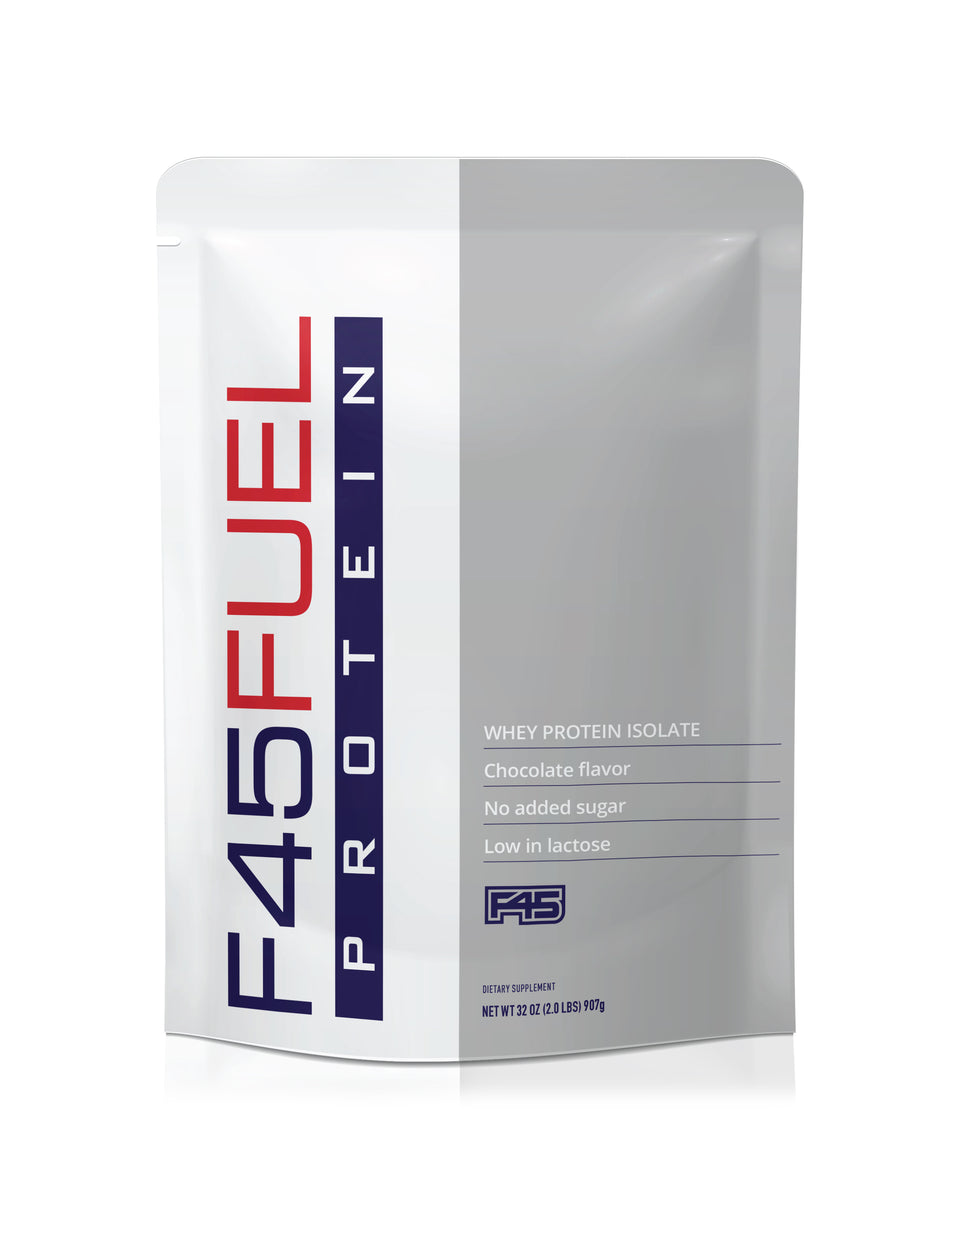 F45 Fuel Whey Protein Isolate - Chocolate -  6 x 2lb Packs